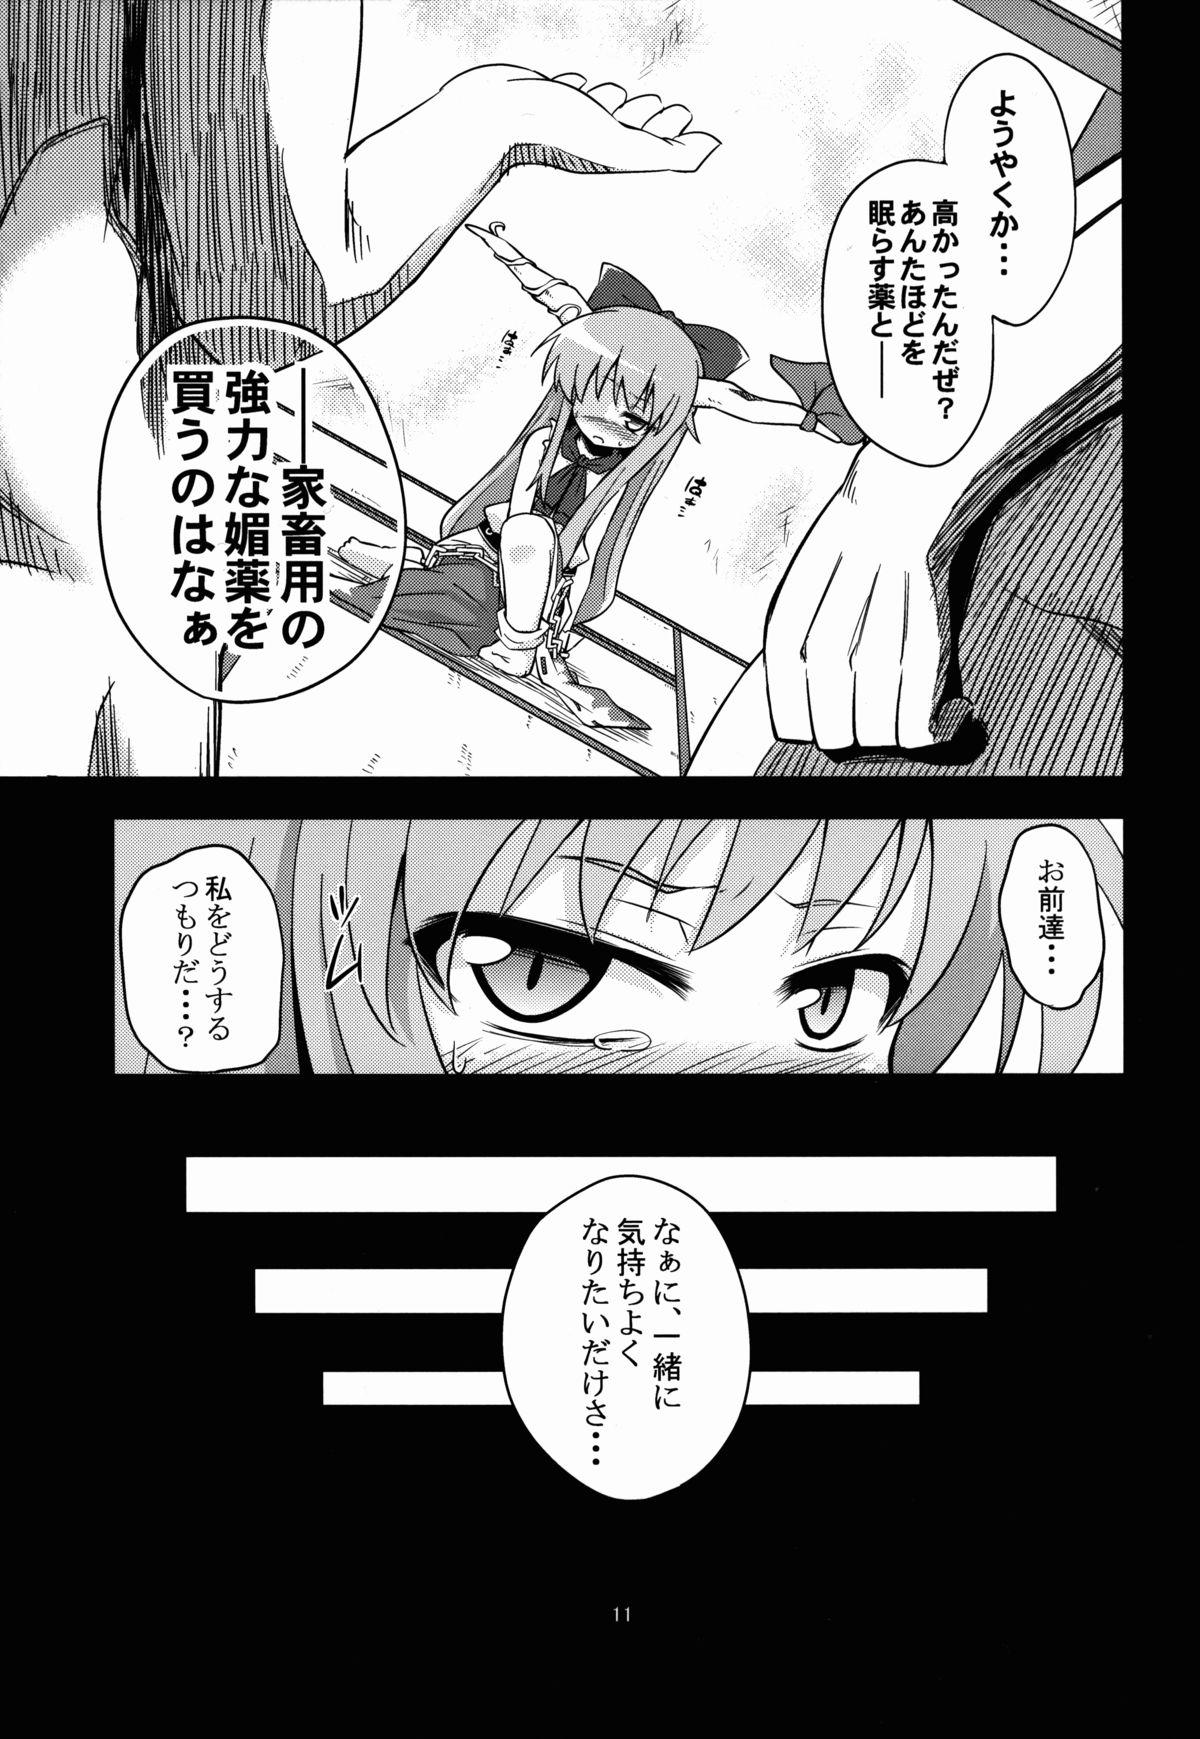 Young Old 鬼犯嘘犯喜 - Touhou project Amature - Page 11